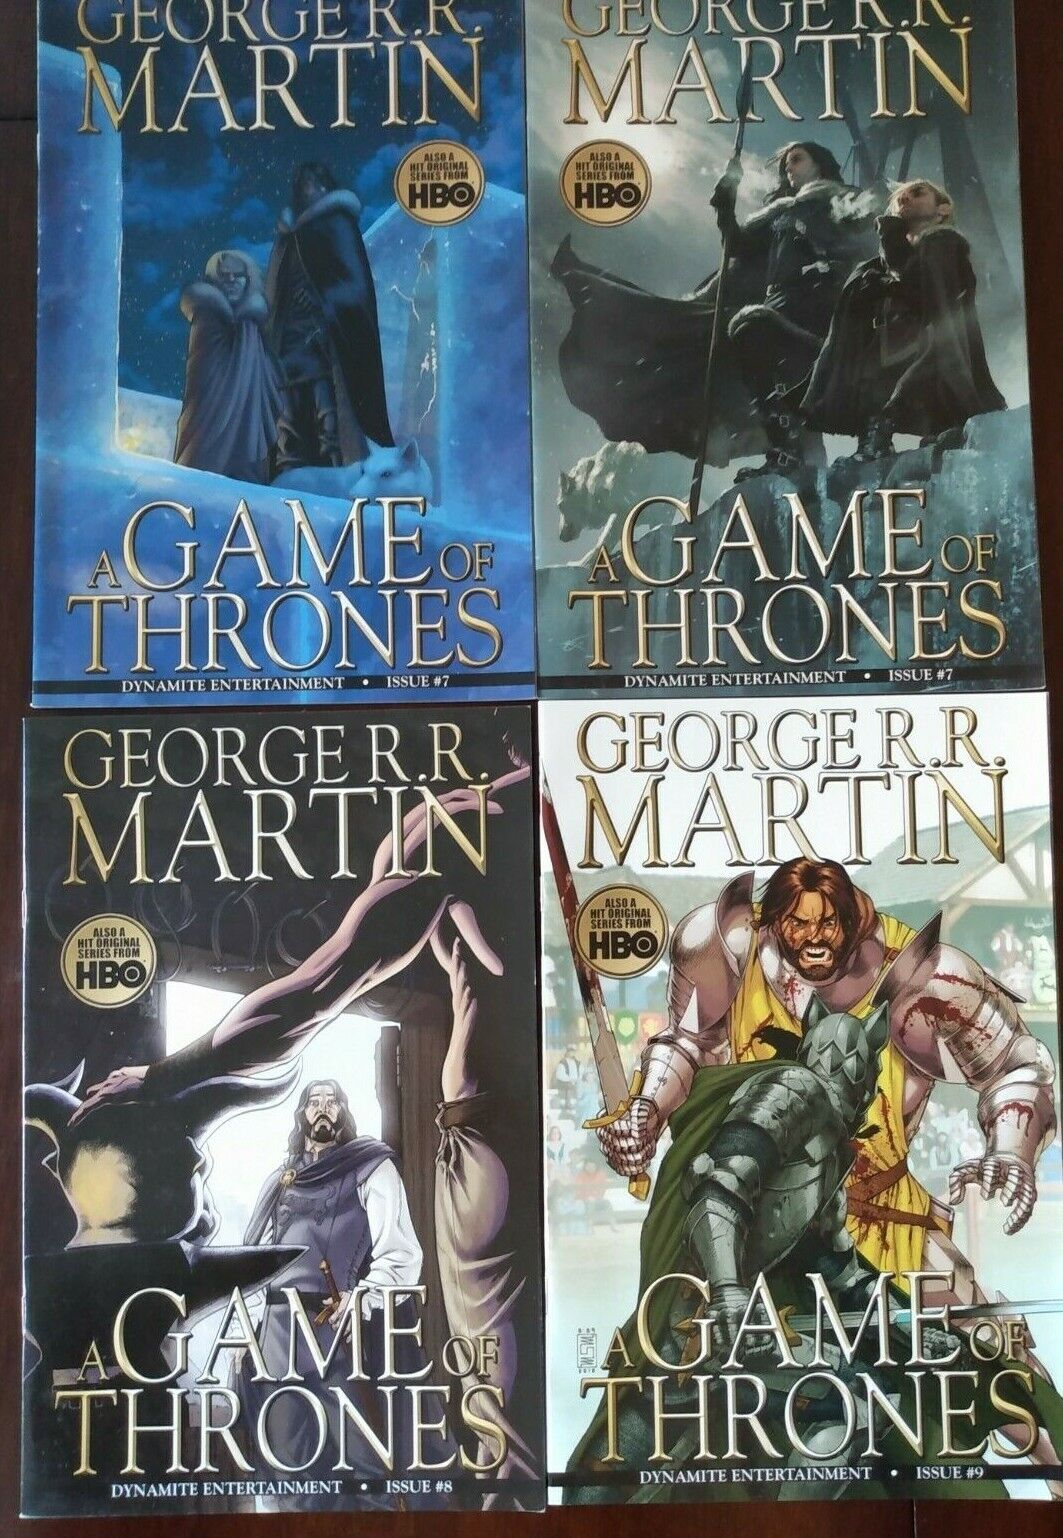 A Game of Thrones: George R.R. Martin #7 #7 #8 #9 Dynamite 2012 1st Printing